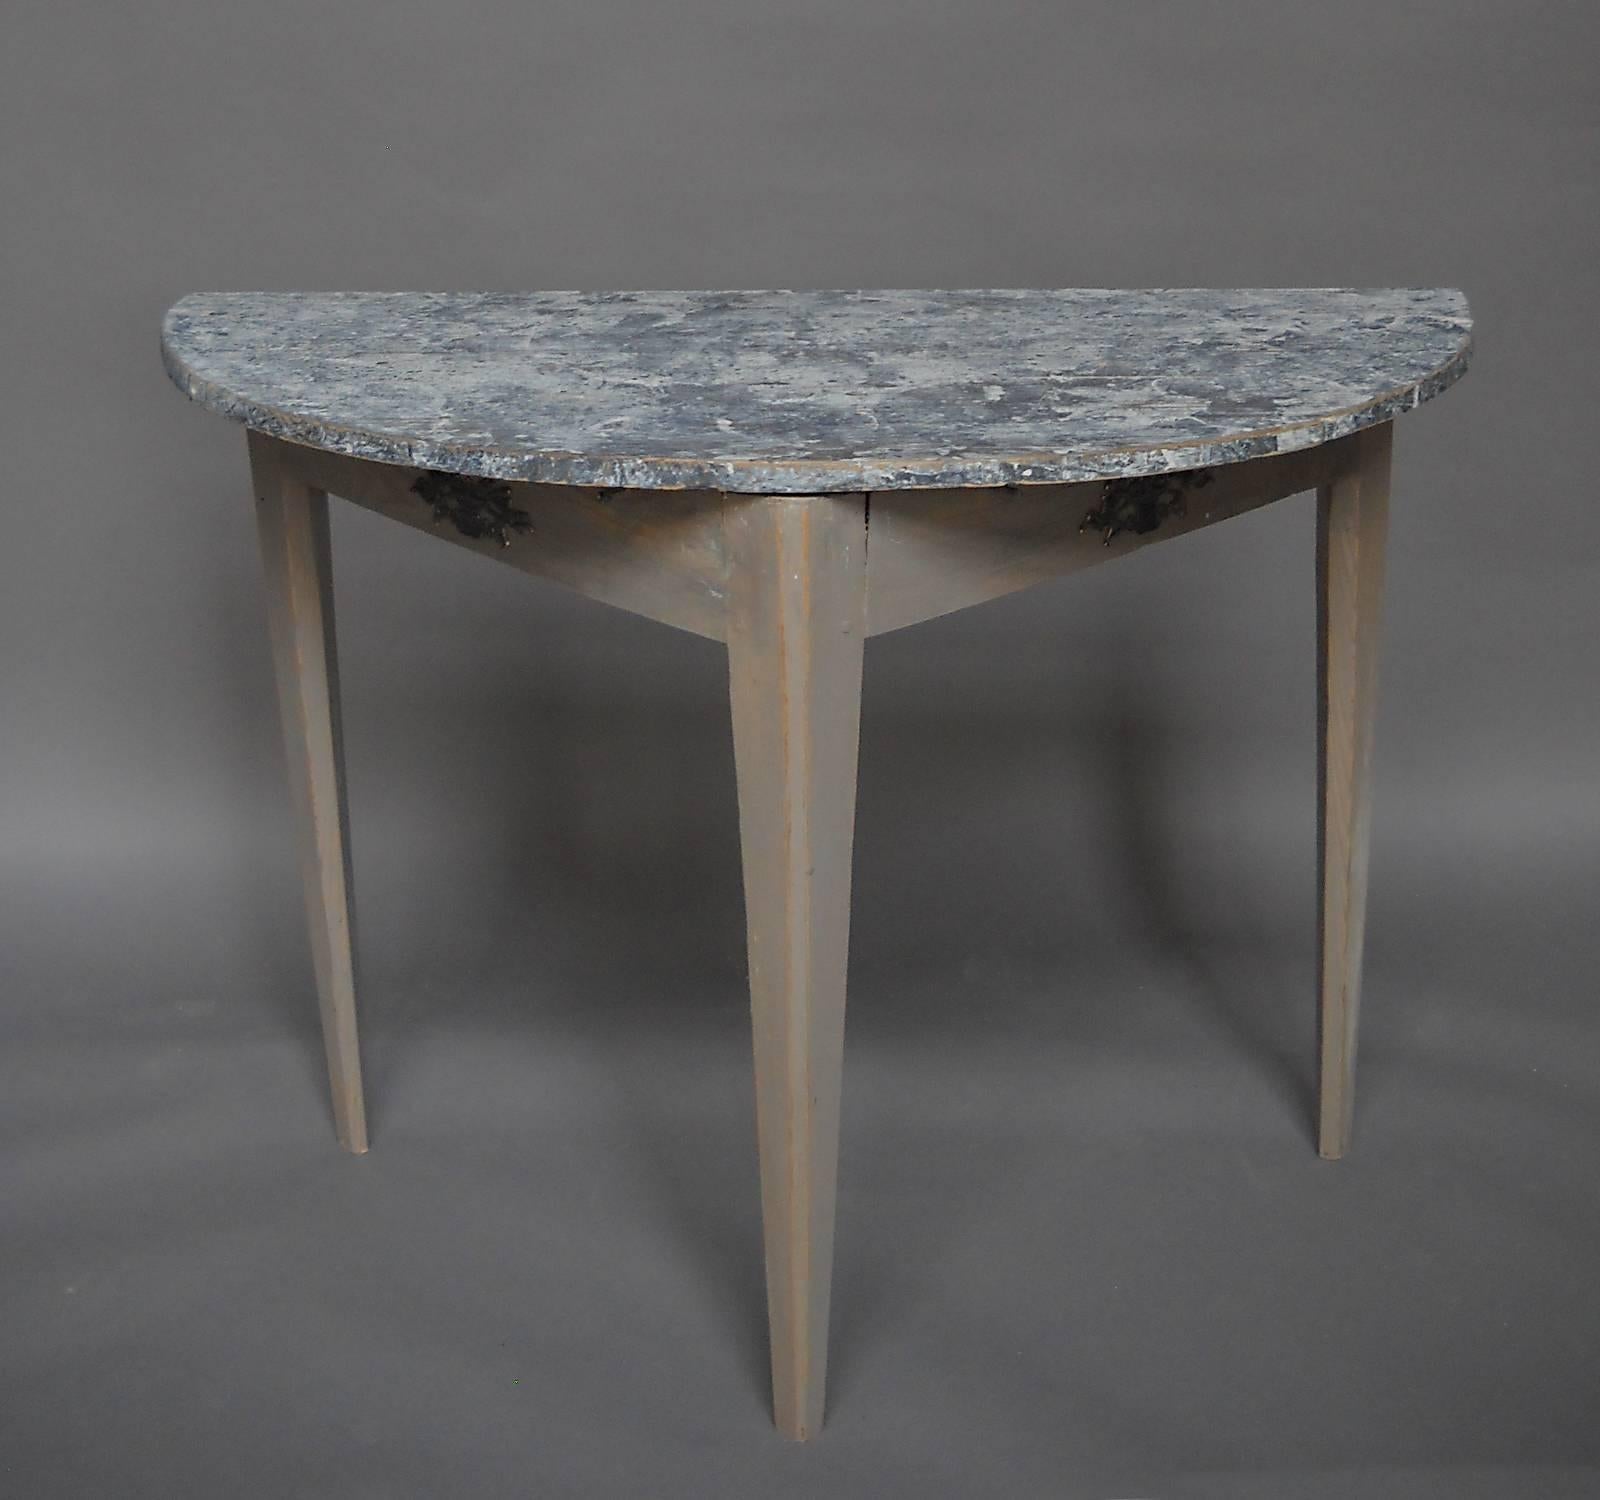 Hand-Painted Pair of Swedish Demilune Tables with Marbled Tops